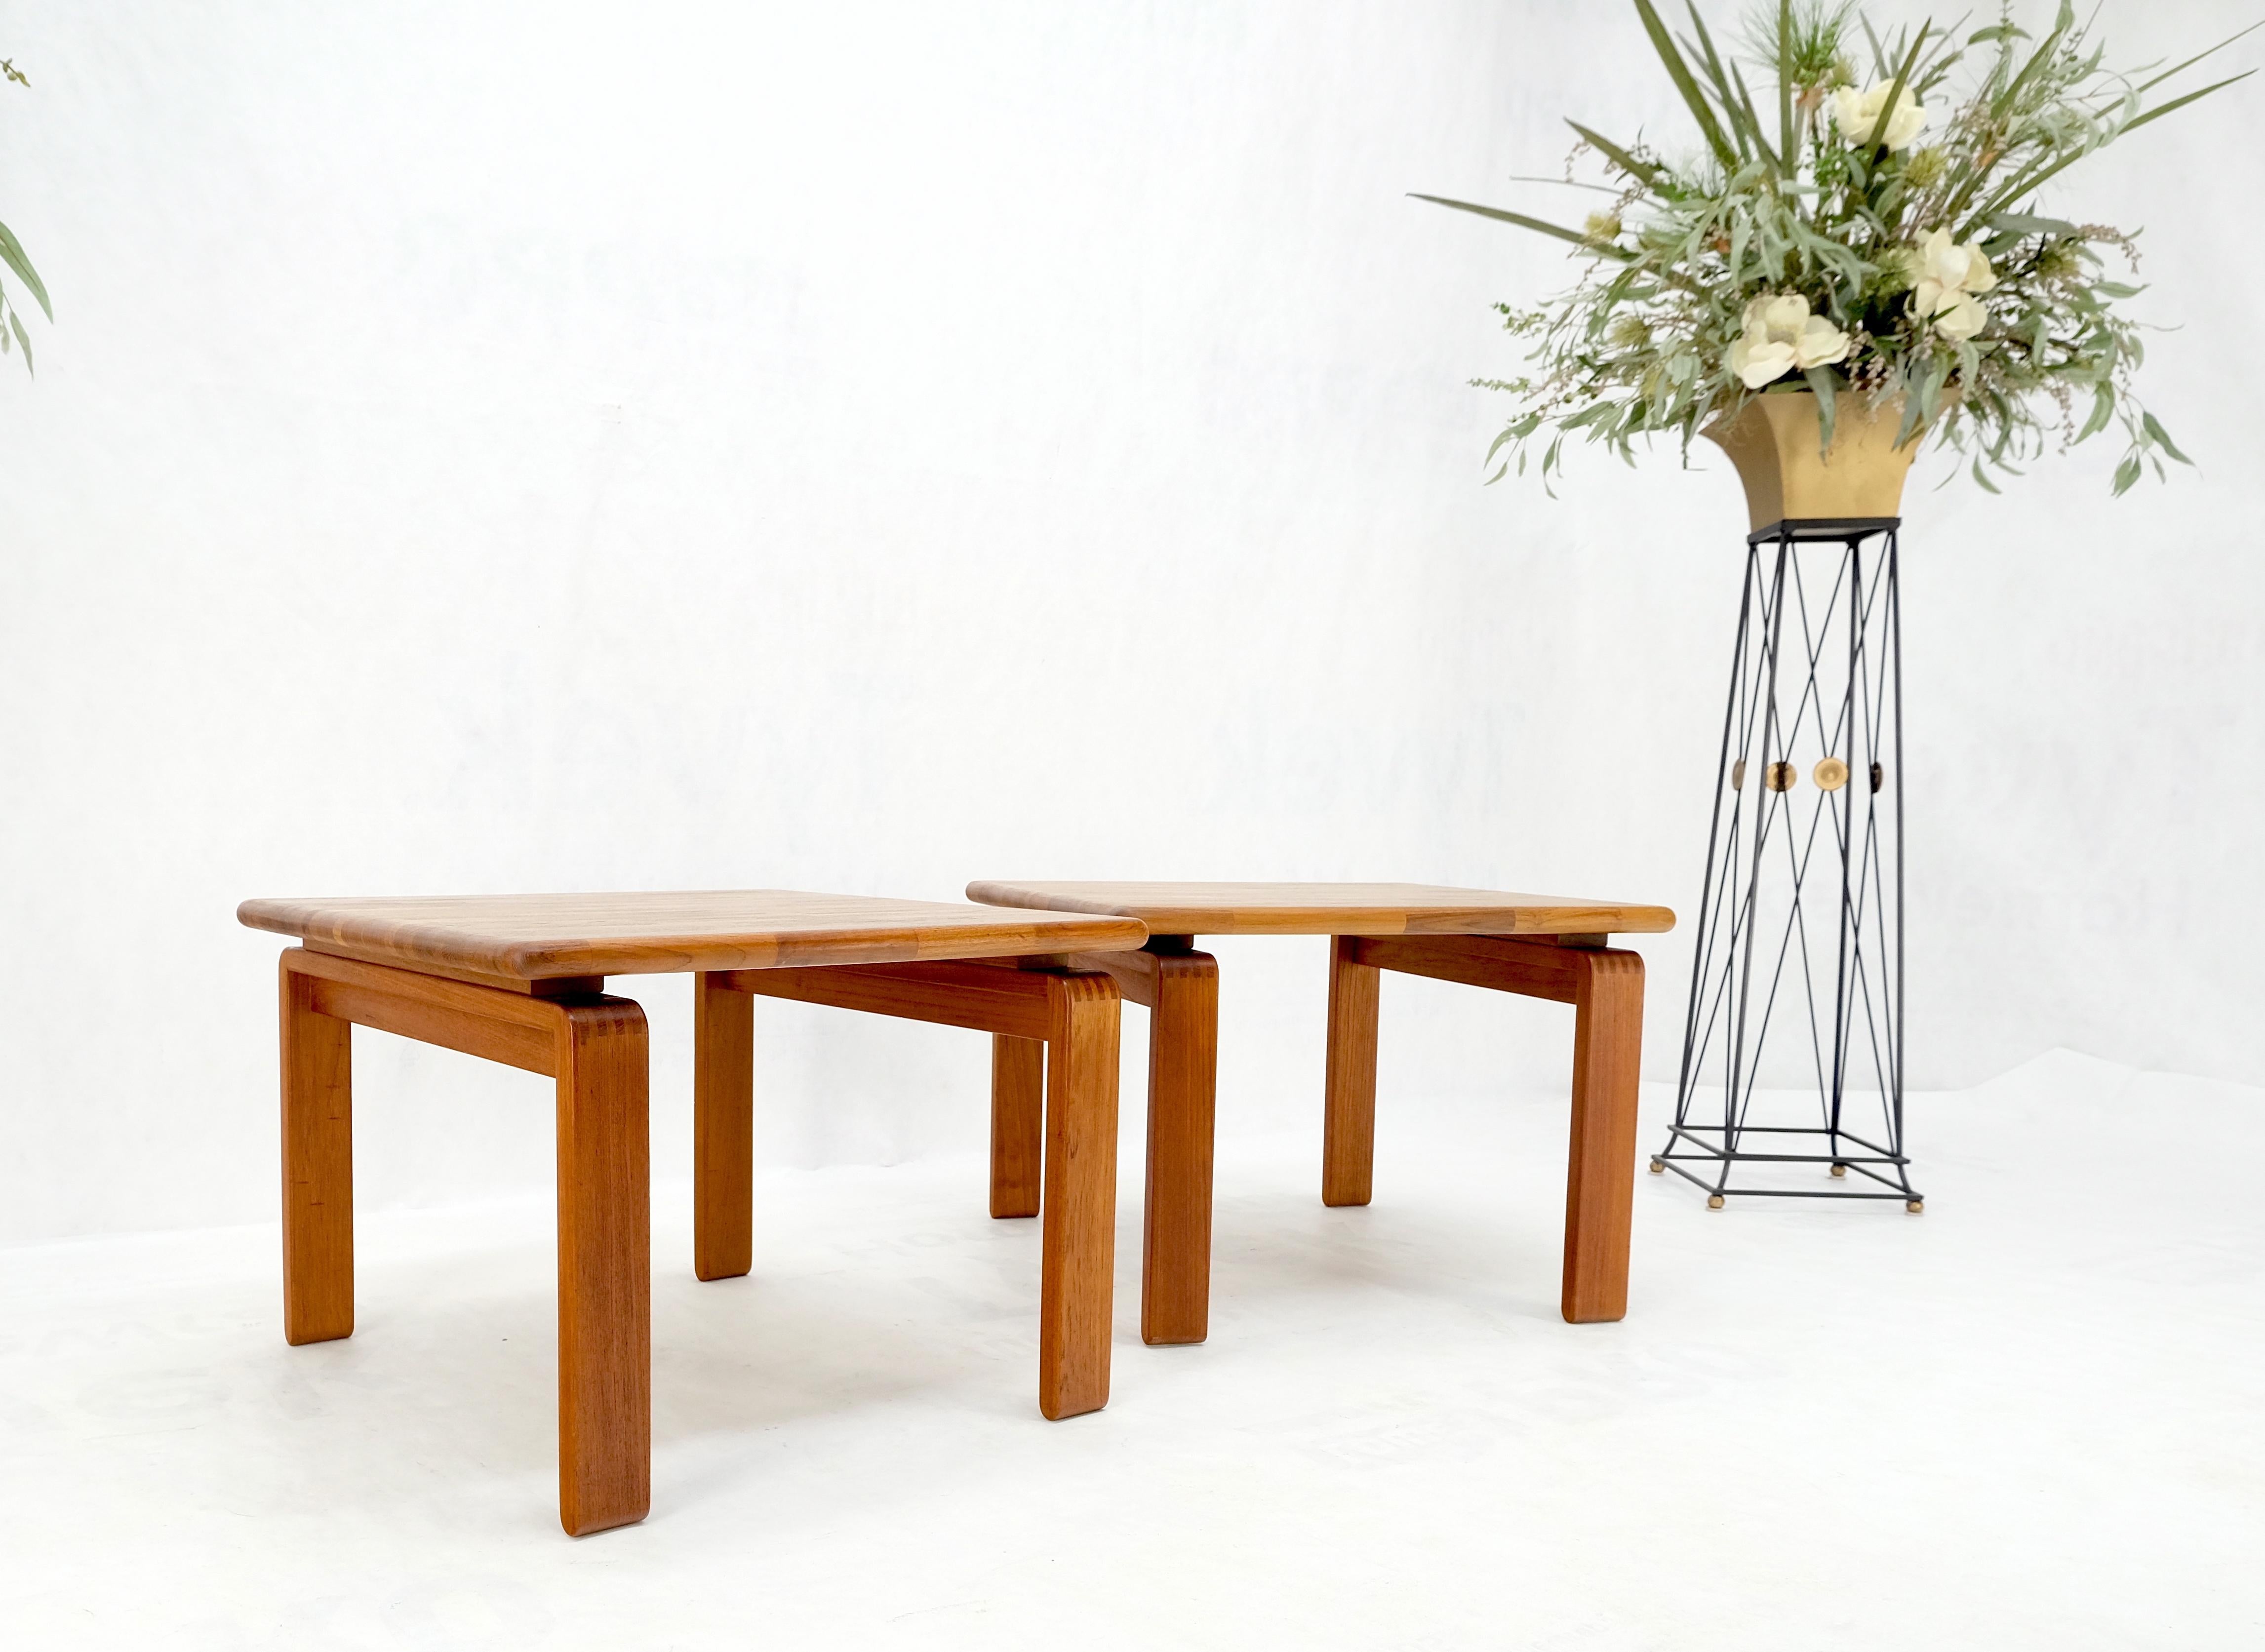 Pair of Solid Teak Danish Mid-Century Modern Square Side End Coffee Tables Mint In Excellent Condition For Sale In Rockaway, NJ